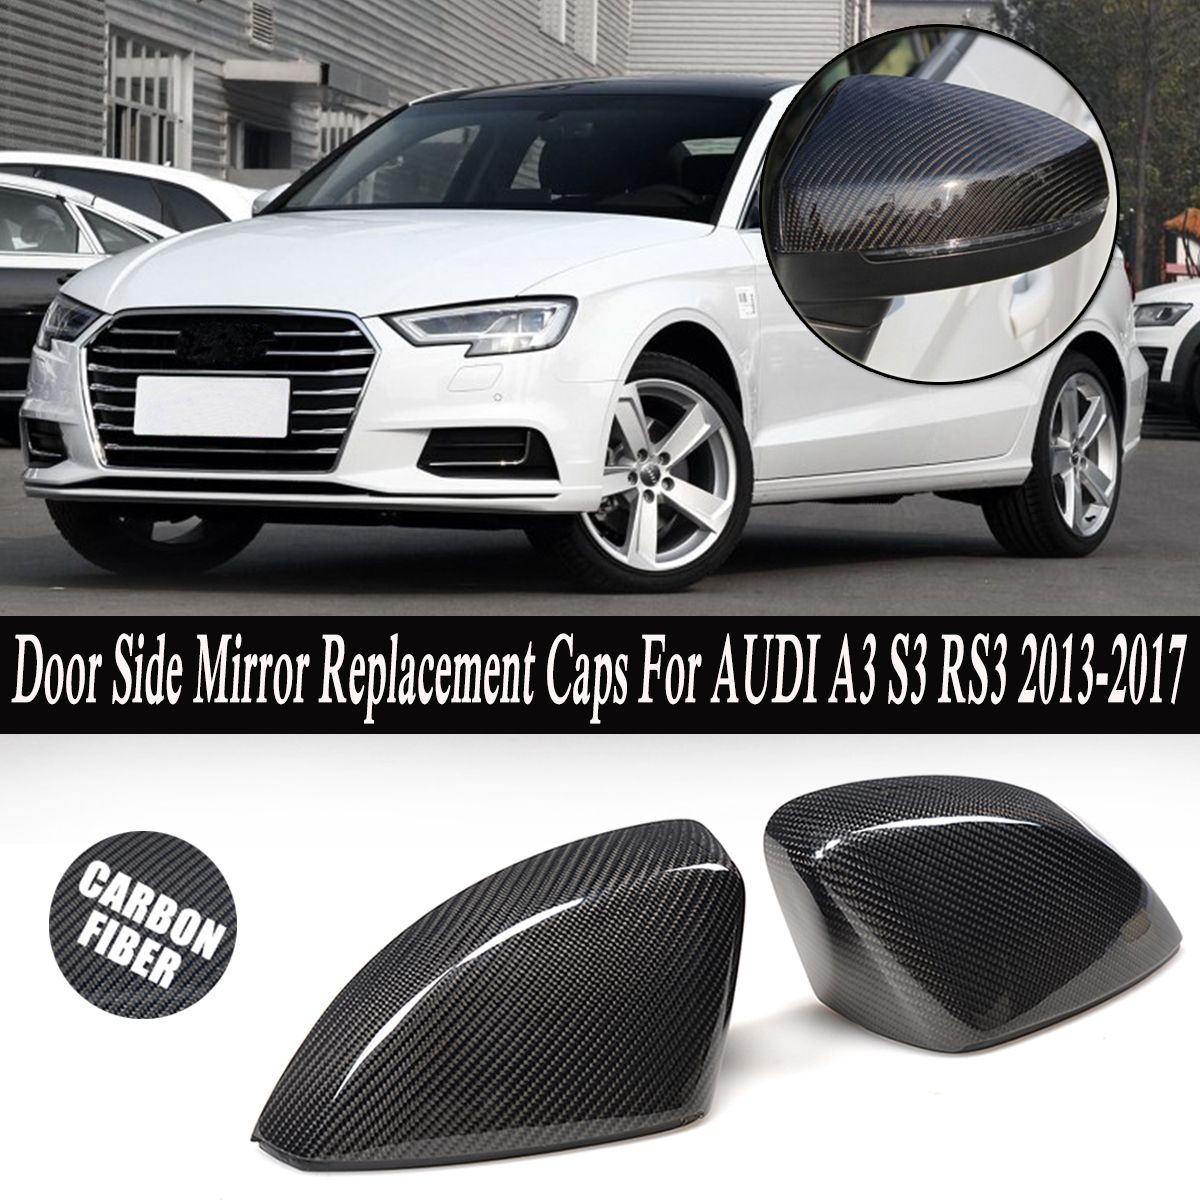 Real-Carbon-Fiber-Side-Car-Mirror-Replacement-Caps-Cover-for-AUDI-A3-S3-RS3-1299069